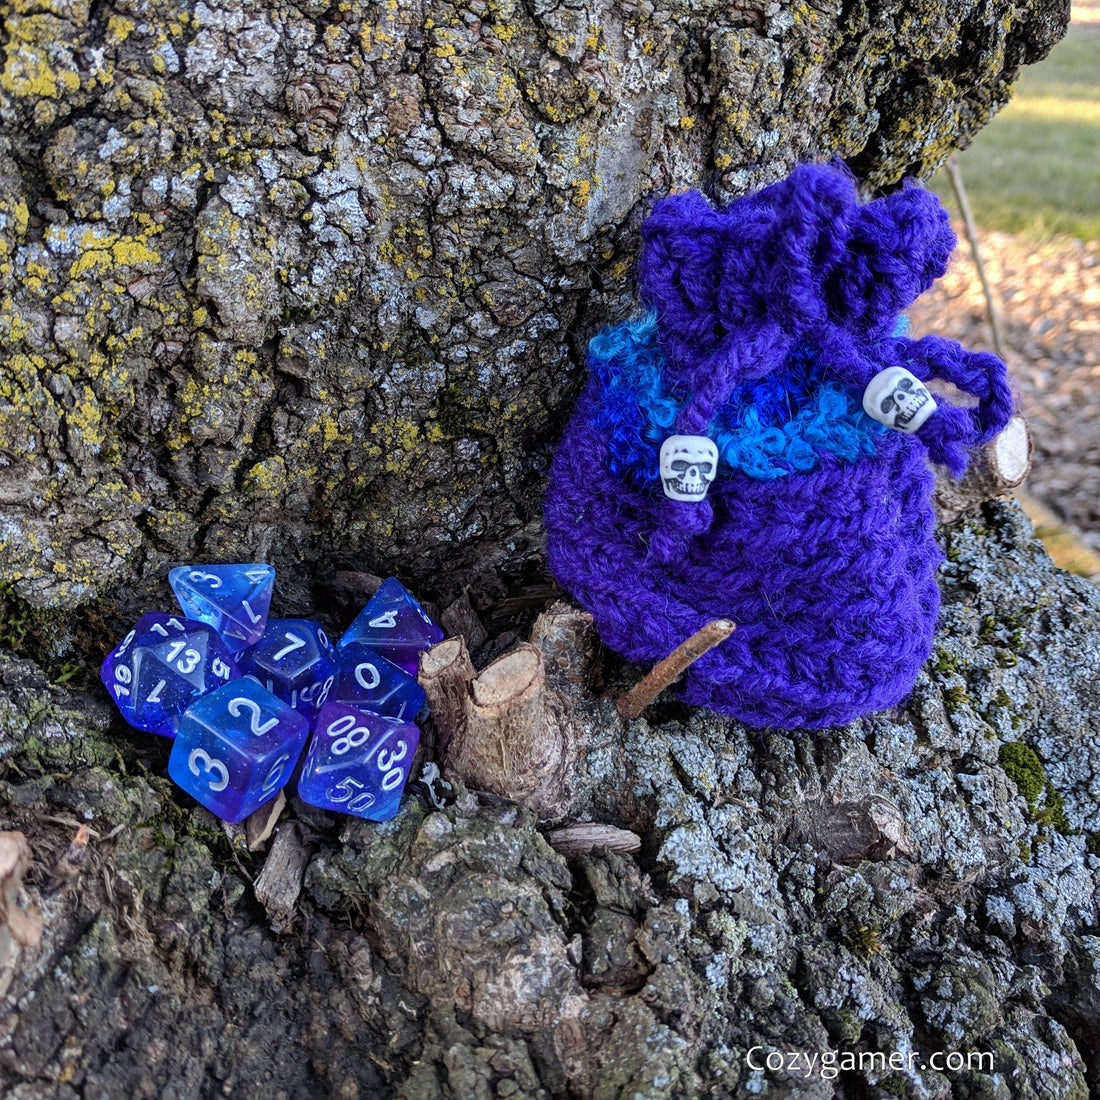 New Dice Bags and Dice Bag + Dice Sets handmade by CozyGamer